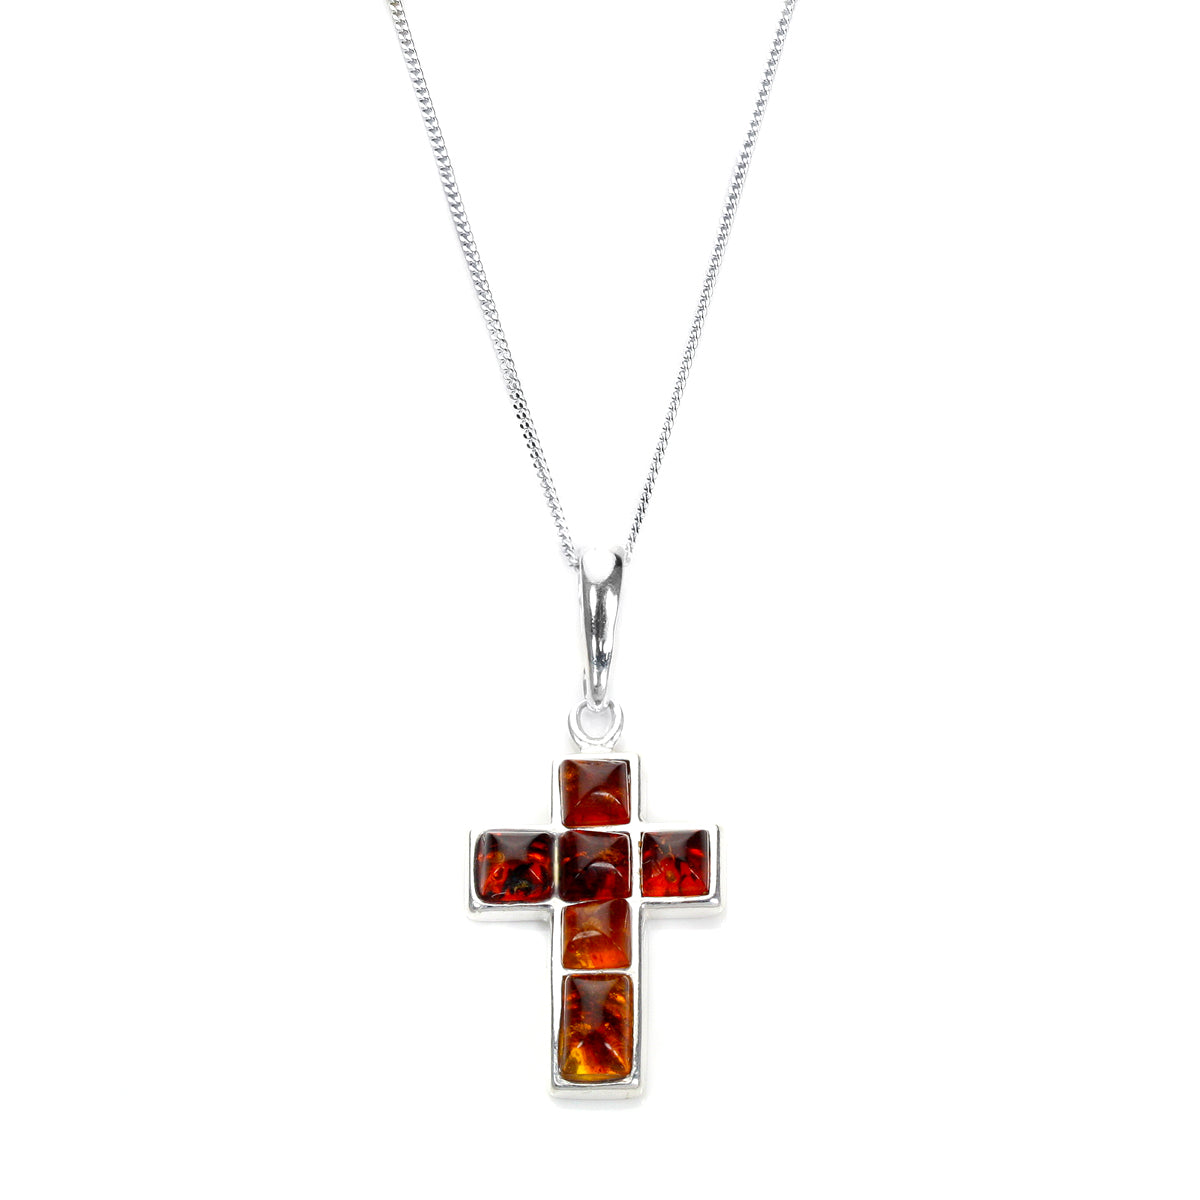 Sterling Silver & Baltic Amber Cross Pendant - 16 - 22 Inches